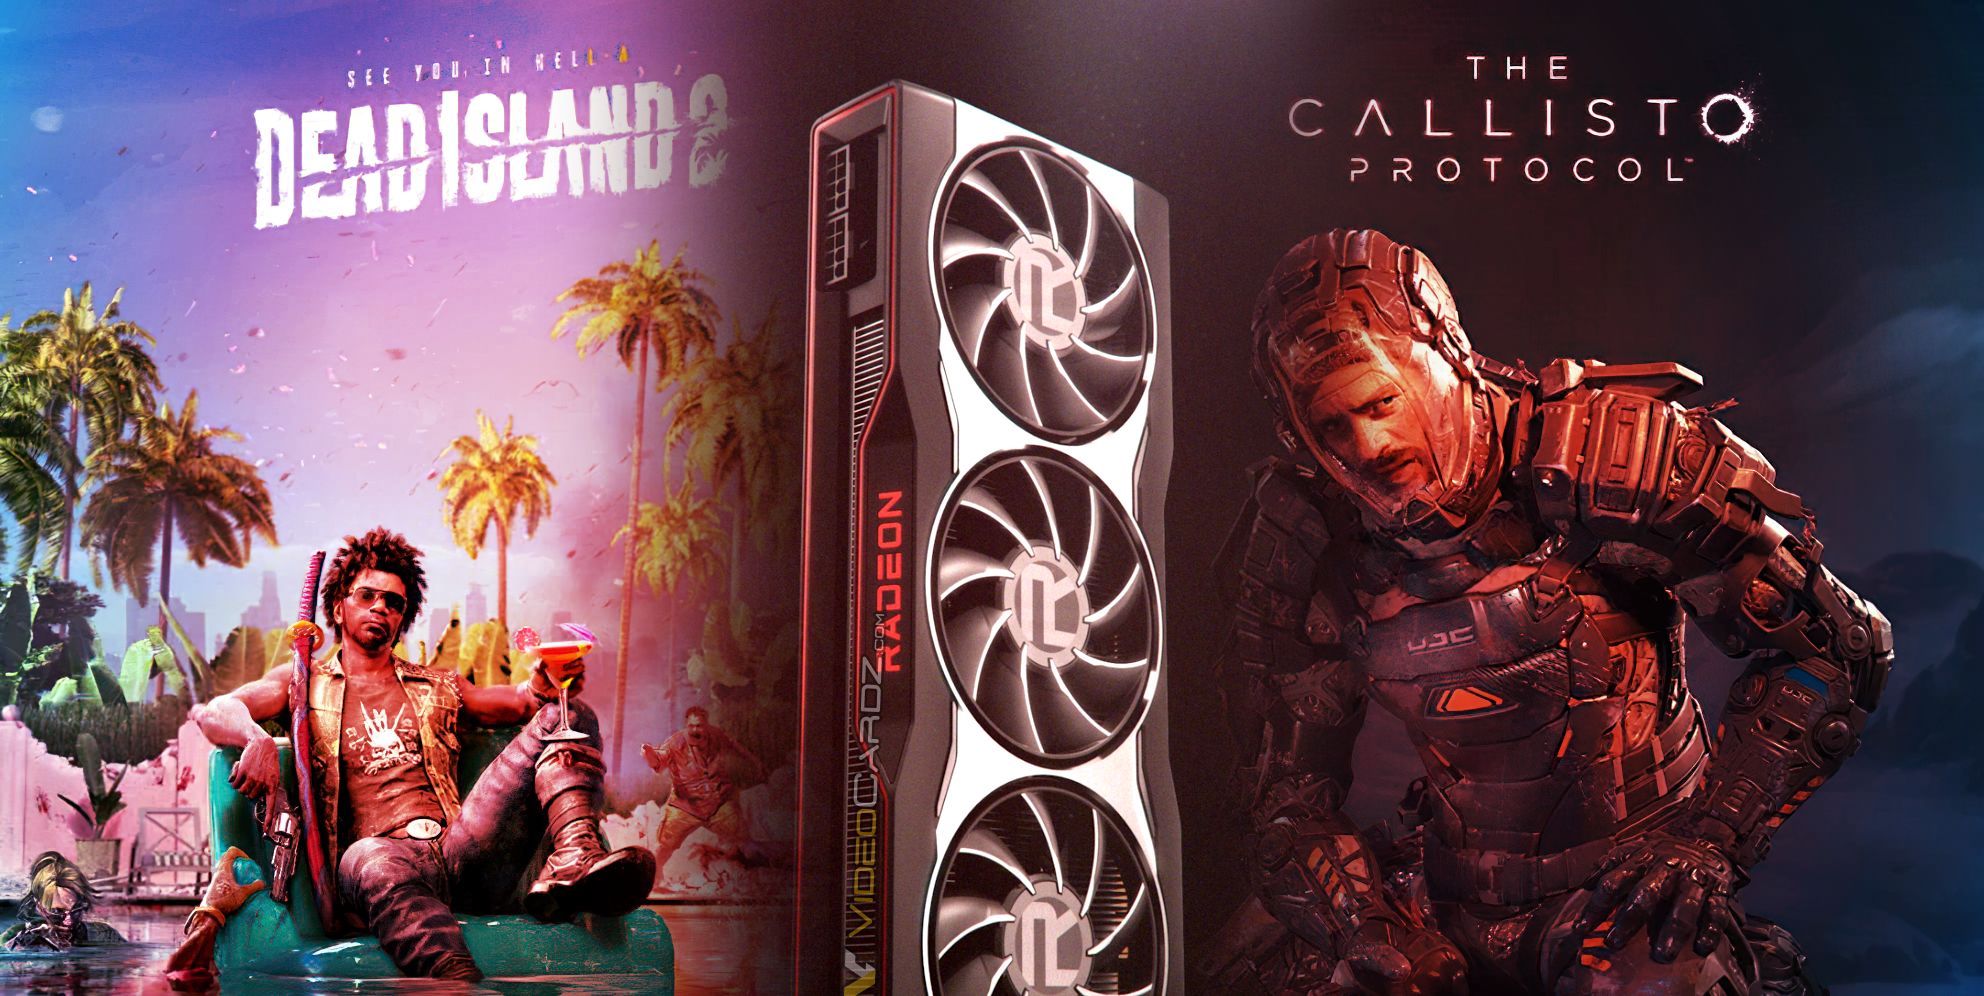 The Callisto Protocol  Download and Buy Today - Epic Games Store